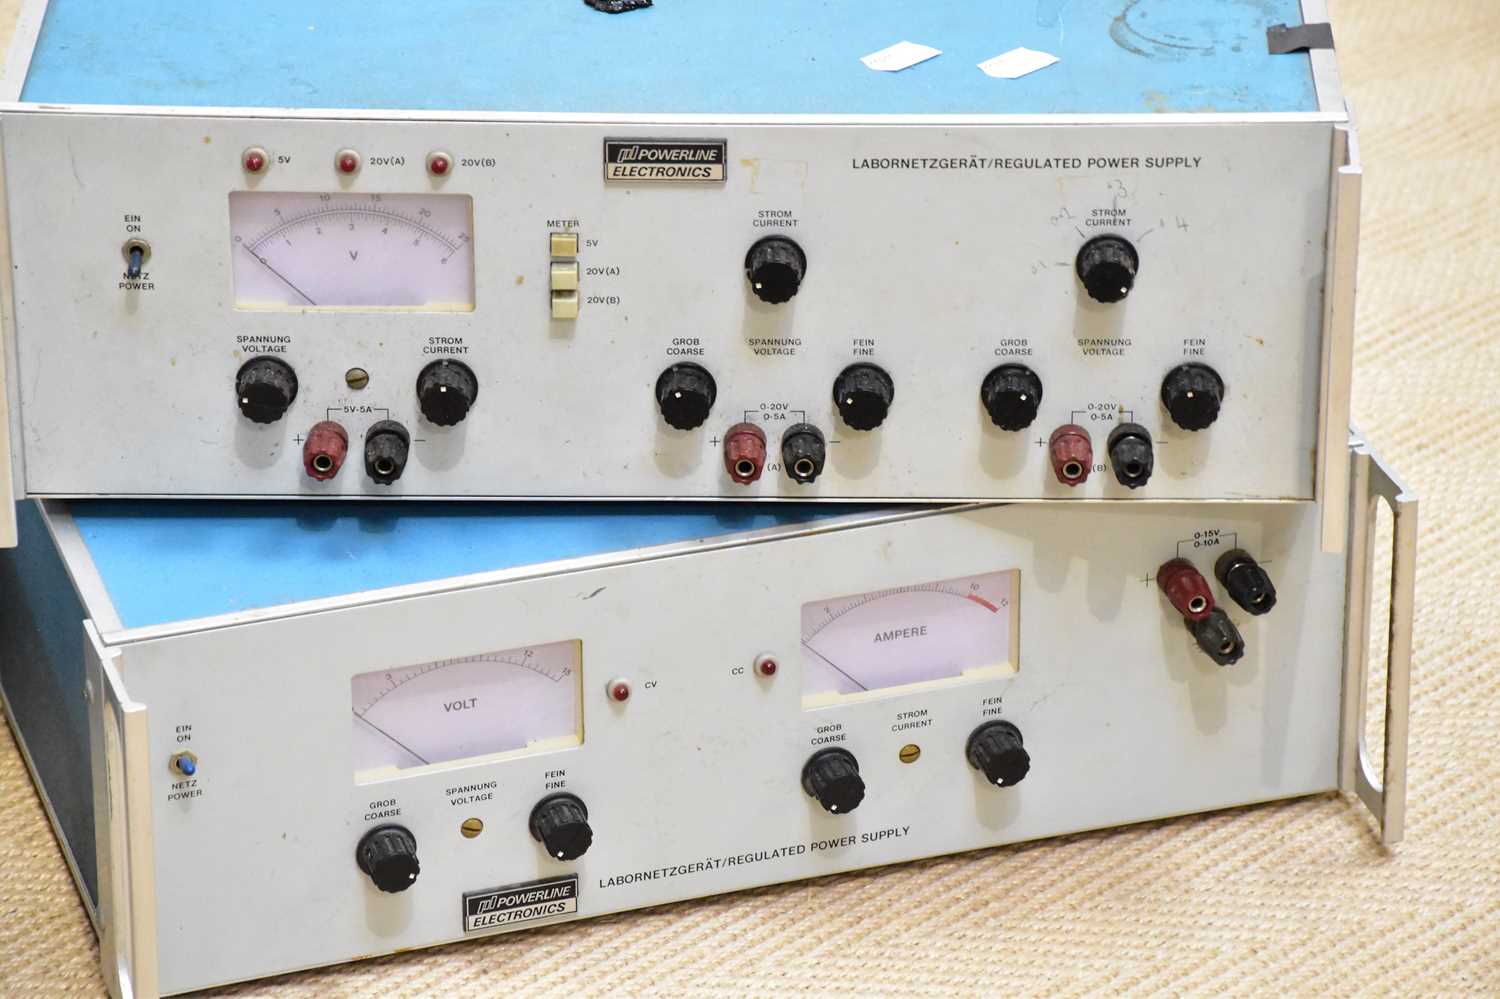 TEKTRONIX; a model 465B oscilliscope, with a powerline electronics regulated power supply and - Image 2 of 4